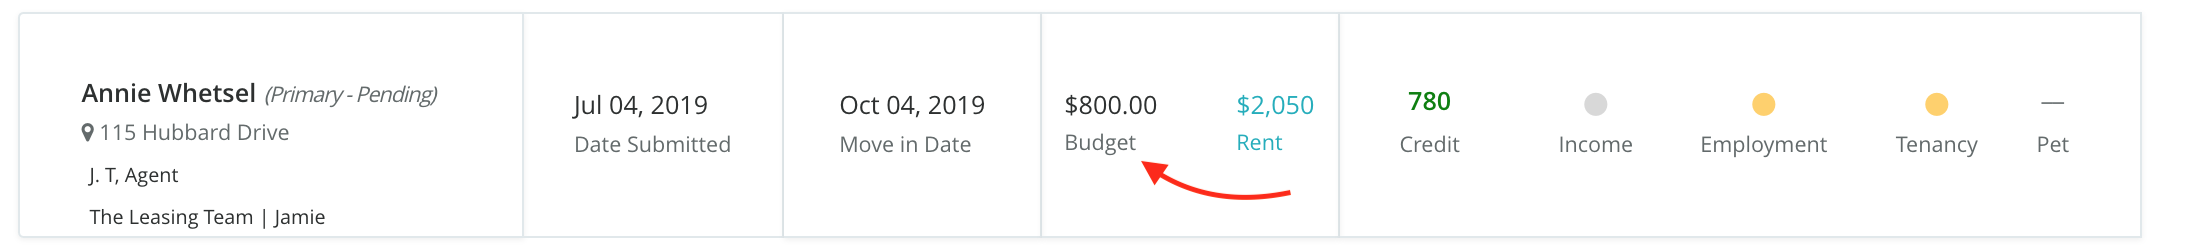 total_budget.png